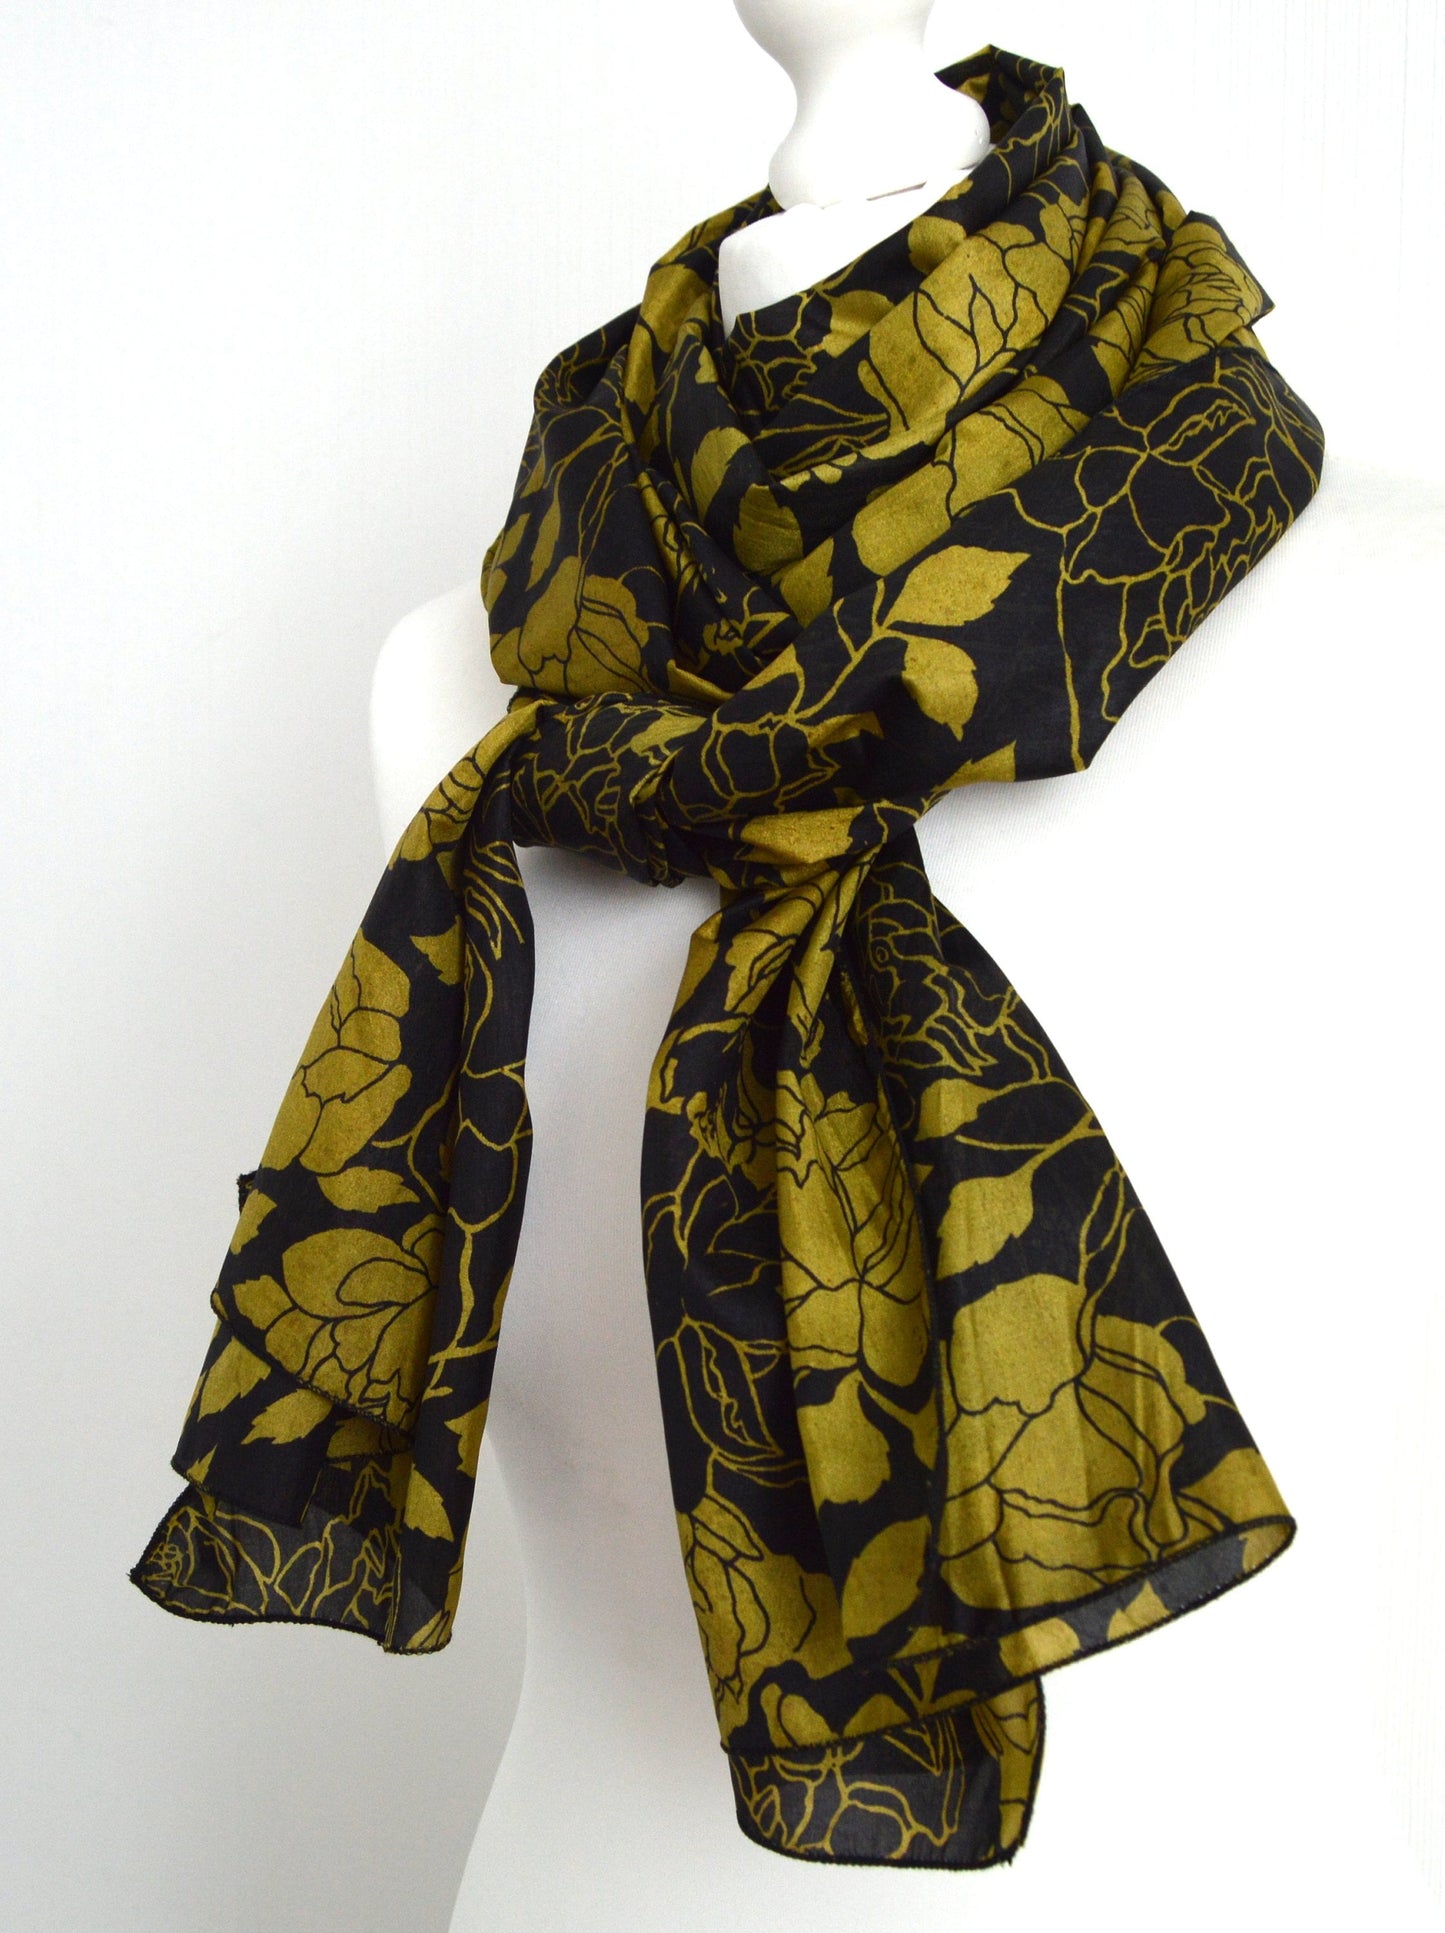 Black Chartreuse Floral Upcycled Vintage Sari Faux Silk Scarf - Handmade Nursing Cover Baby Shower Gift - Ethical Zero Waste Fashion